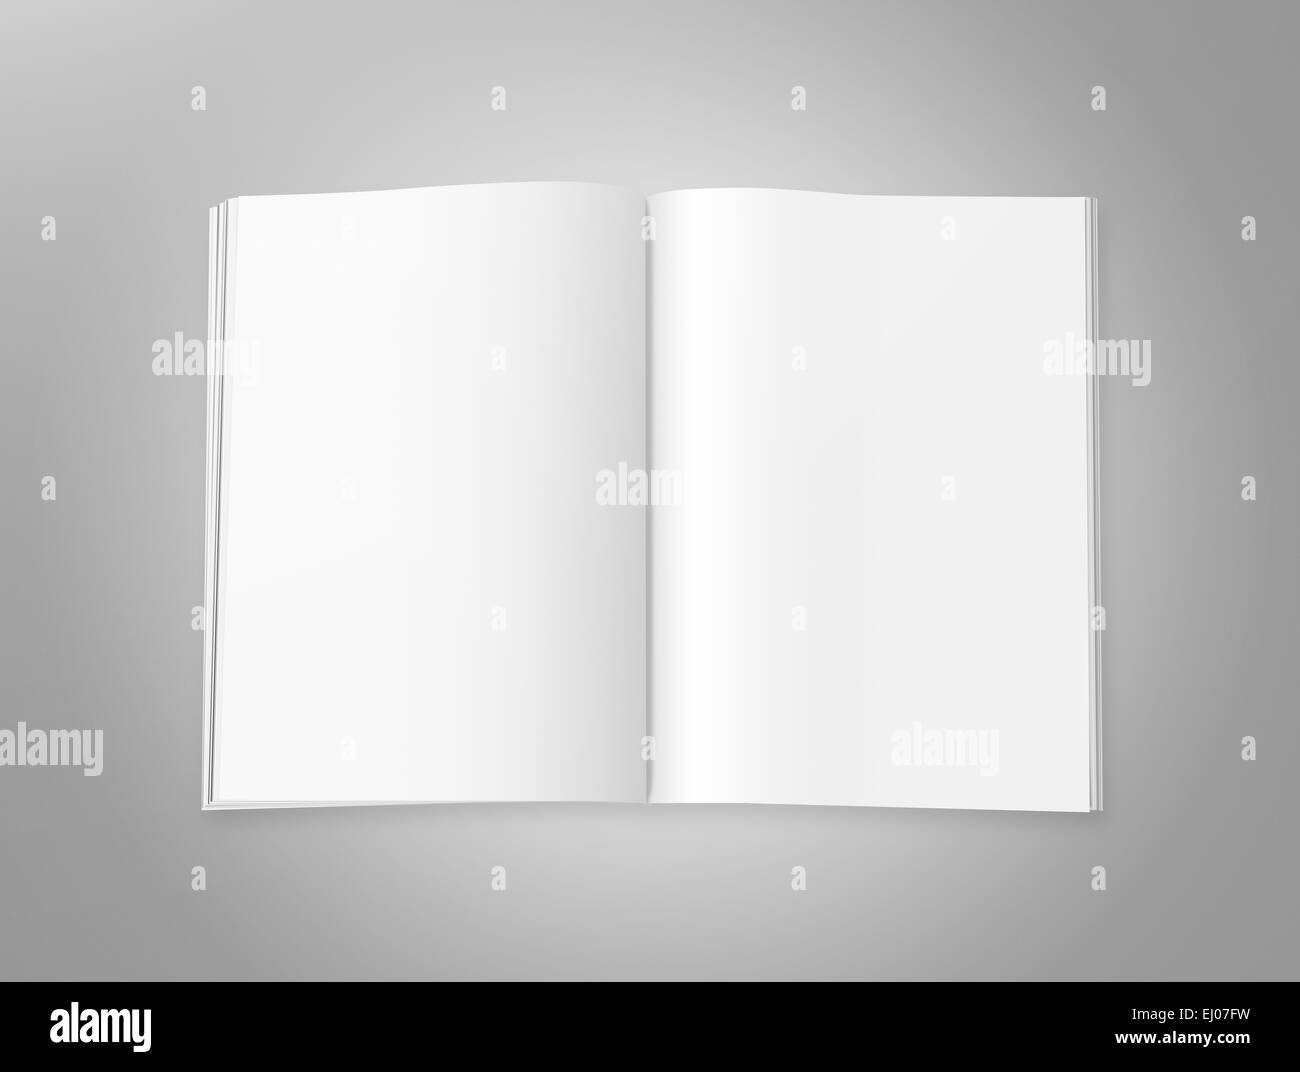 Blank magazine with double spread pages, on a gray background with shadows. Stock Photo